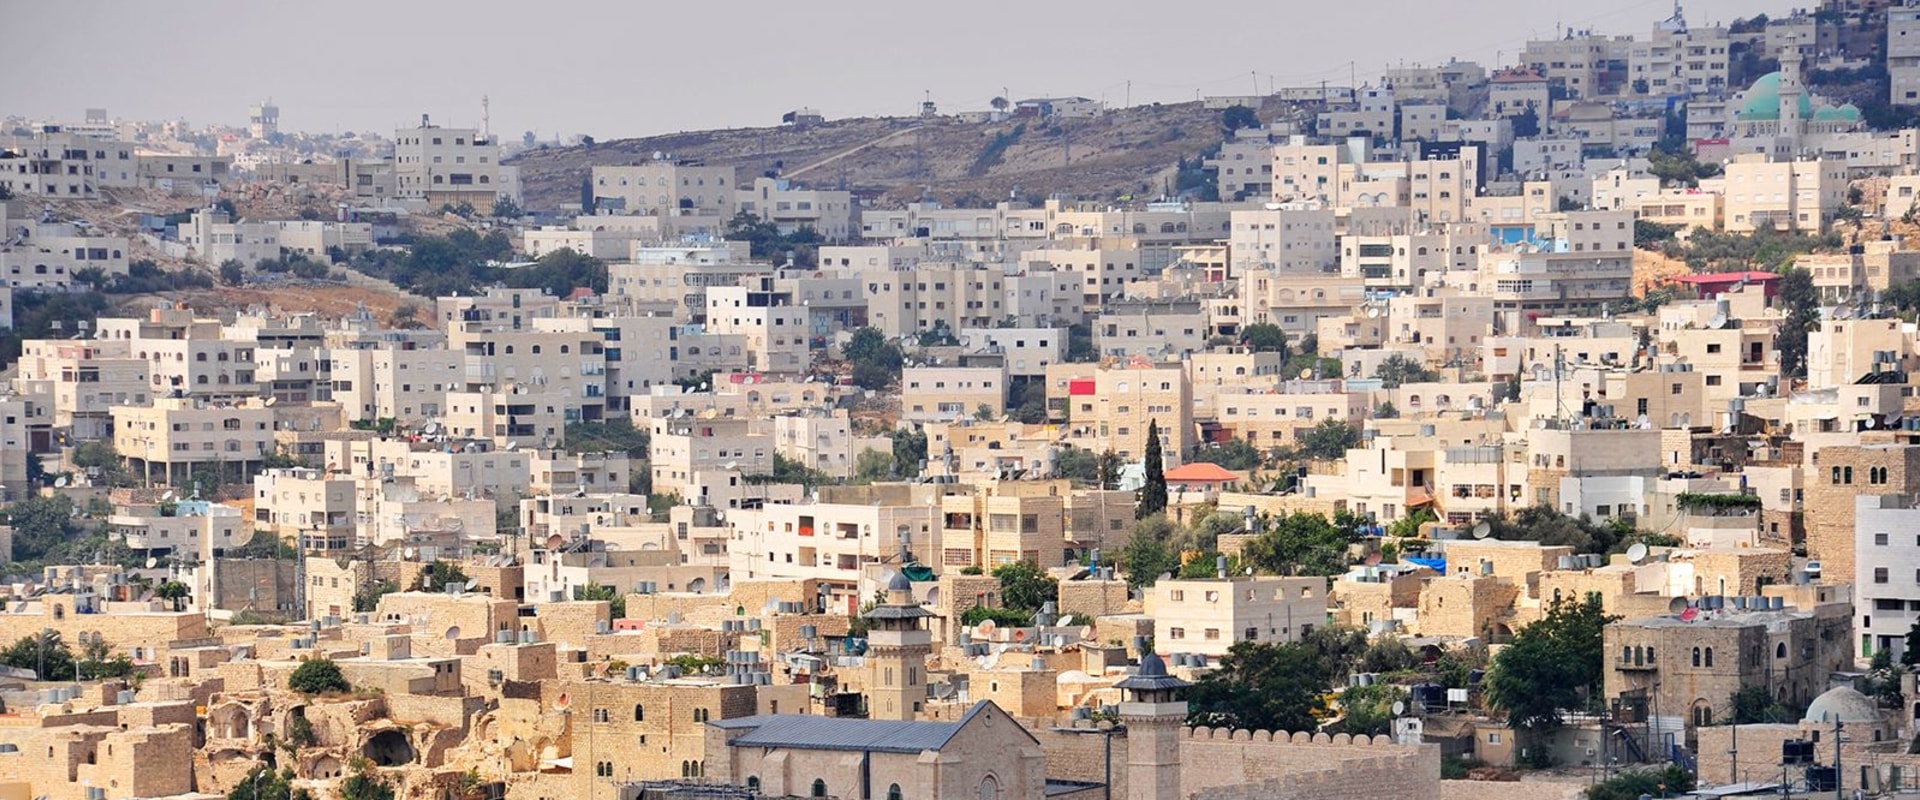 Exploring Hebron: A City of Ancient History and Modern Conflict